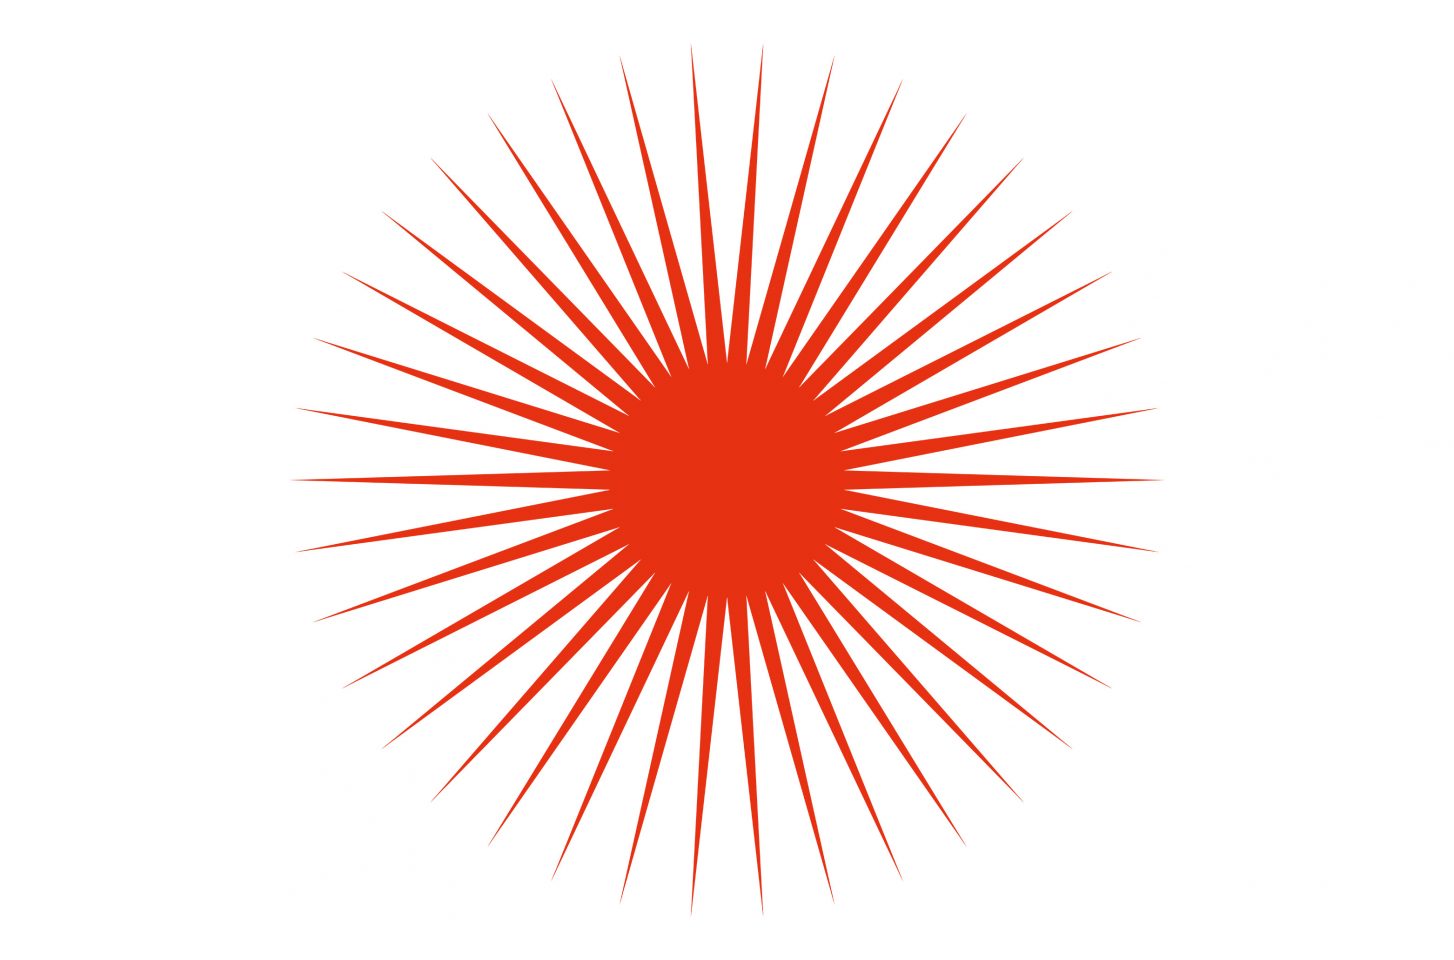 Image of an iconographic red sun on a white background.